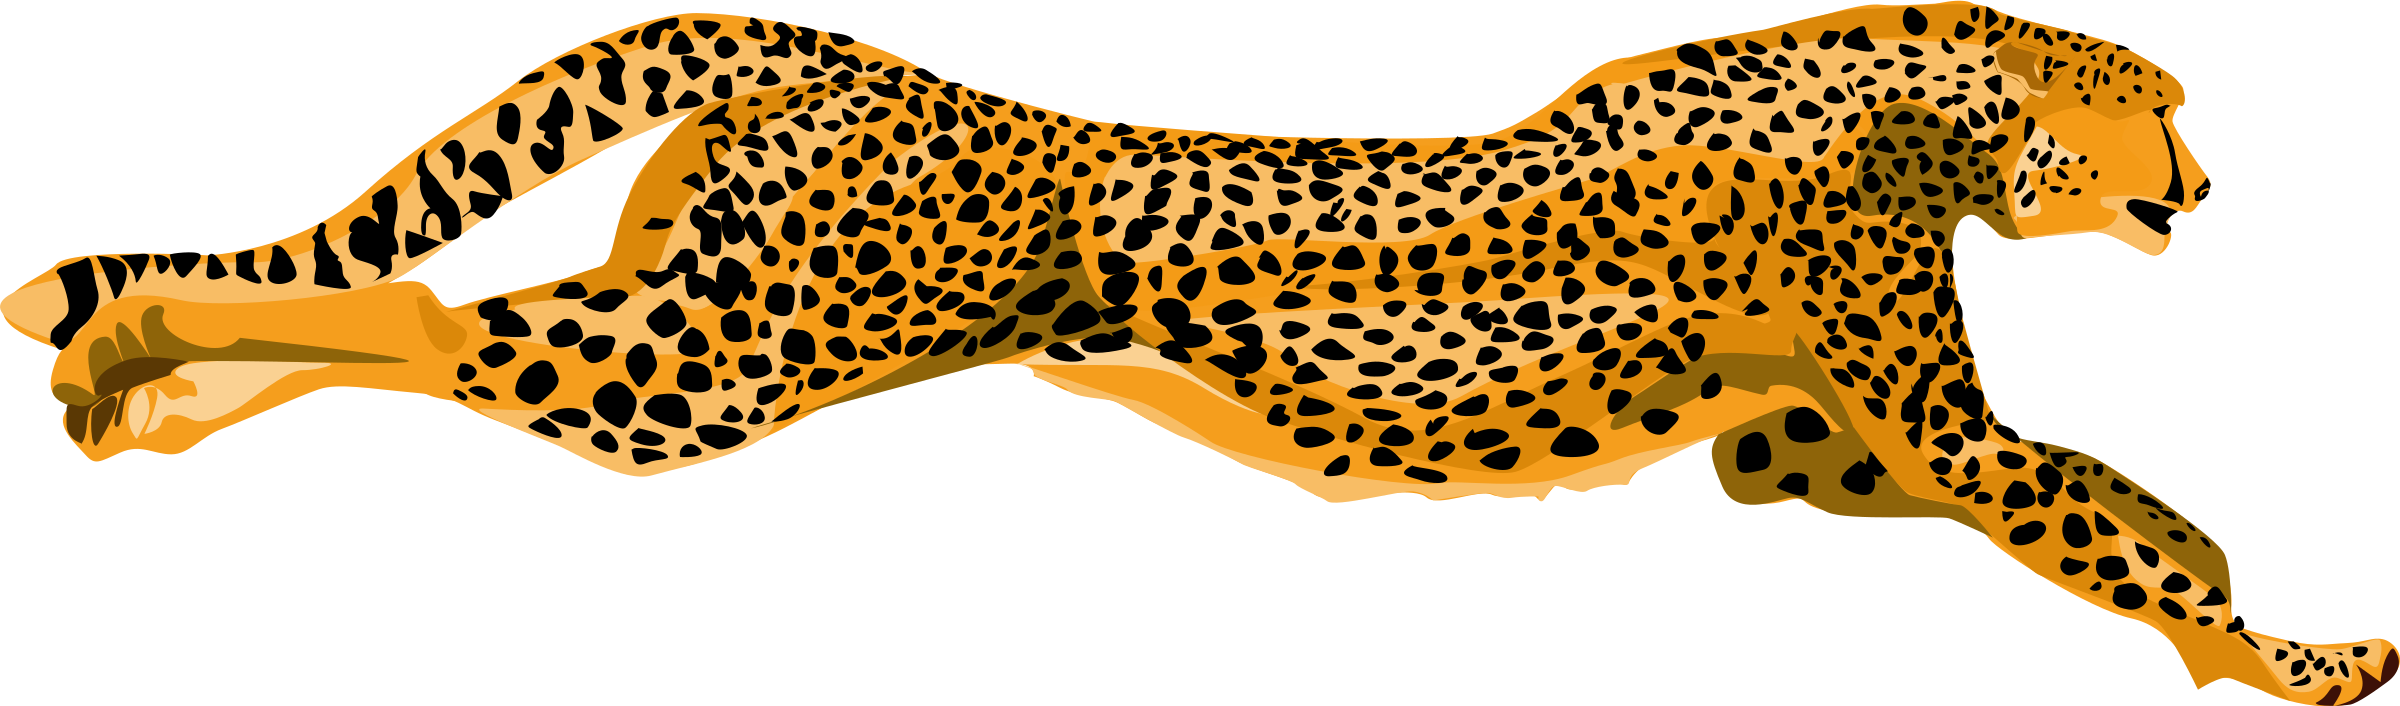 Png images free animals. Head clipart cheetah